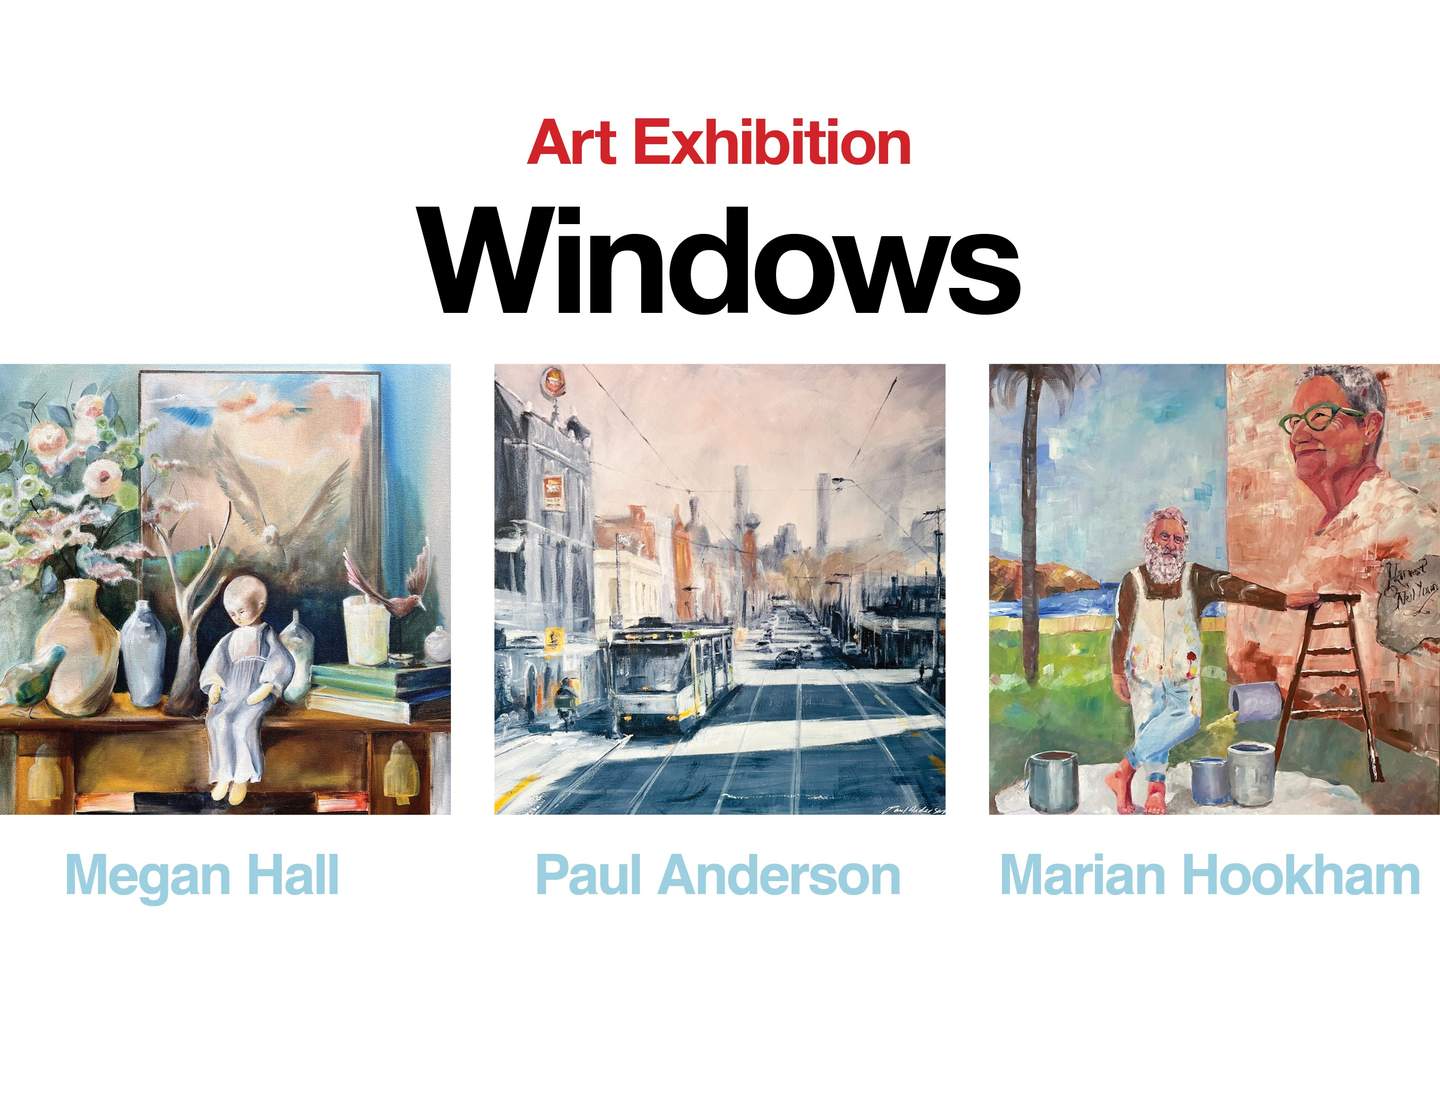 Three paintings from the exhibiting artists, including a table, a tram in a urban setting and man painting a mural of an older woman.